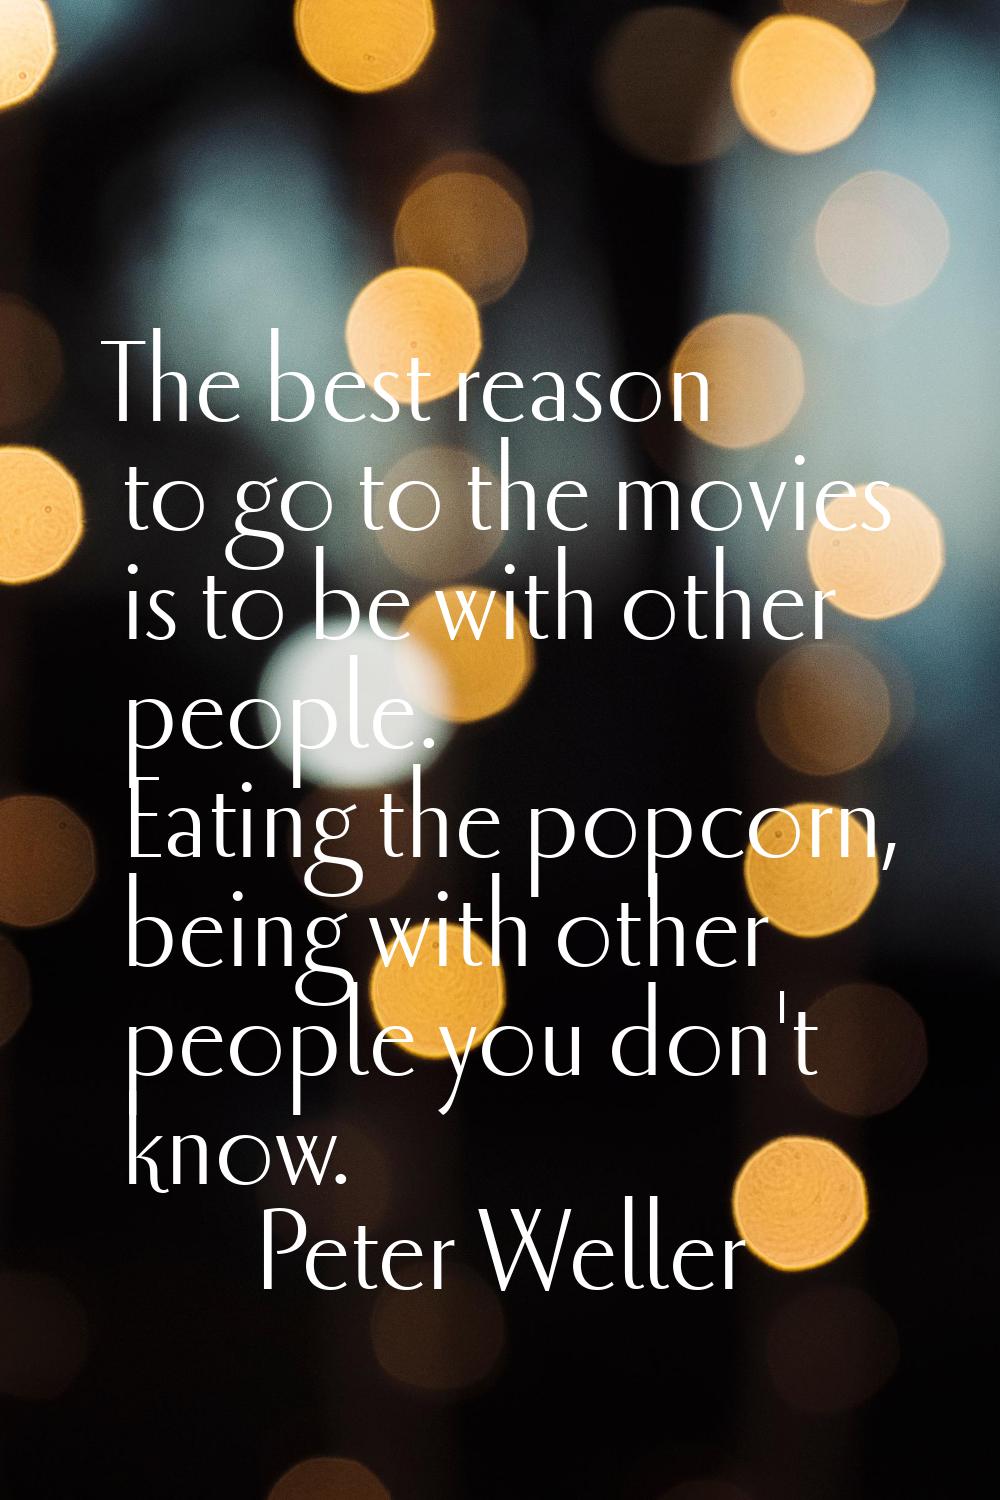 The best reason to go to the movies is to be with other people. Eating the popcorn, being with othe